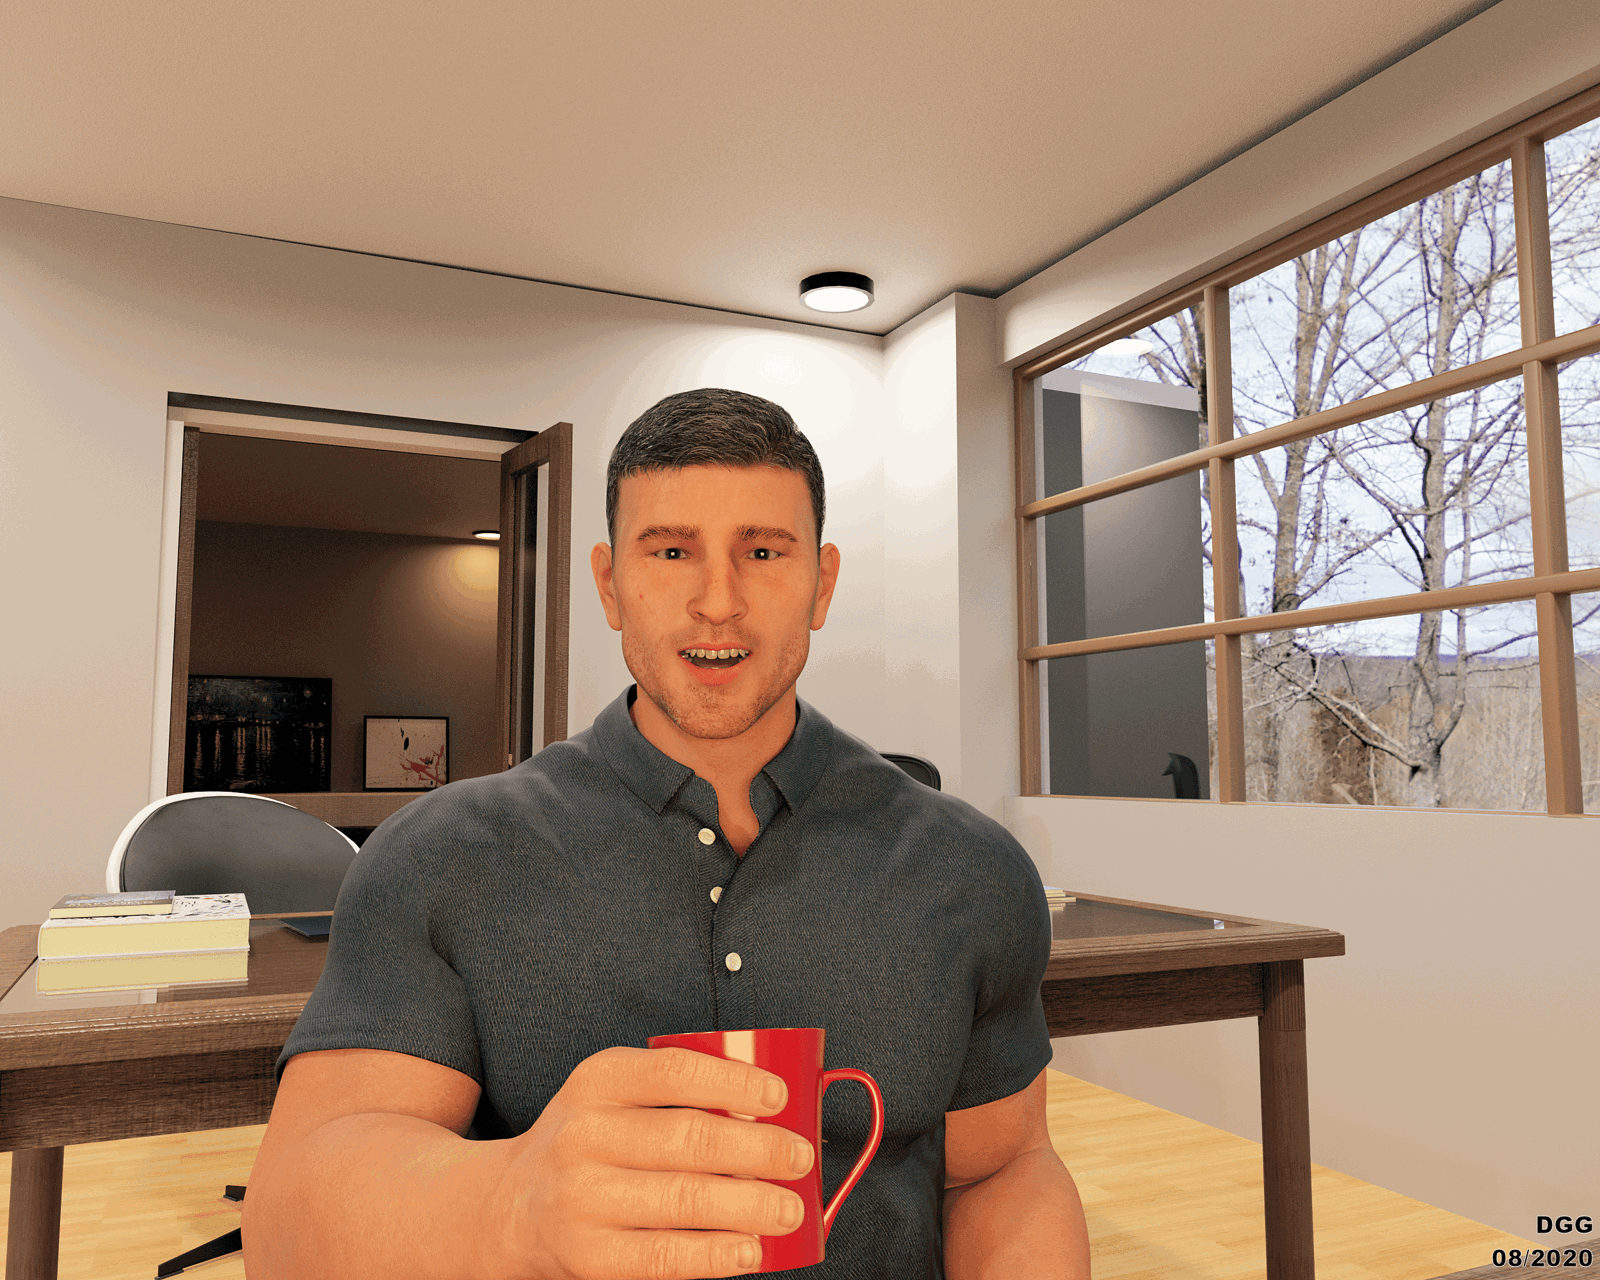 Watch the Photo by CGGayArtNNJ with the username @CGGayArtNNJ, who is a verified user, posted on February 14, 2023. The post is about the topic Gay CGI Art. and the text says 'Teams Call, what they see, and what they DON'T!
#GayCGI, #Gay, #Gimp, #Oral, #Laytex'